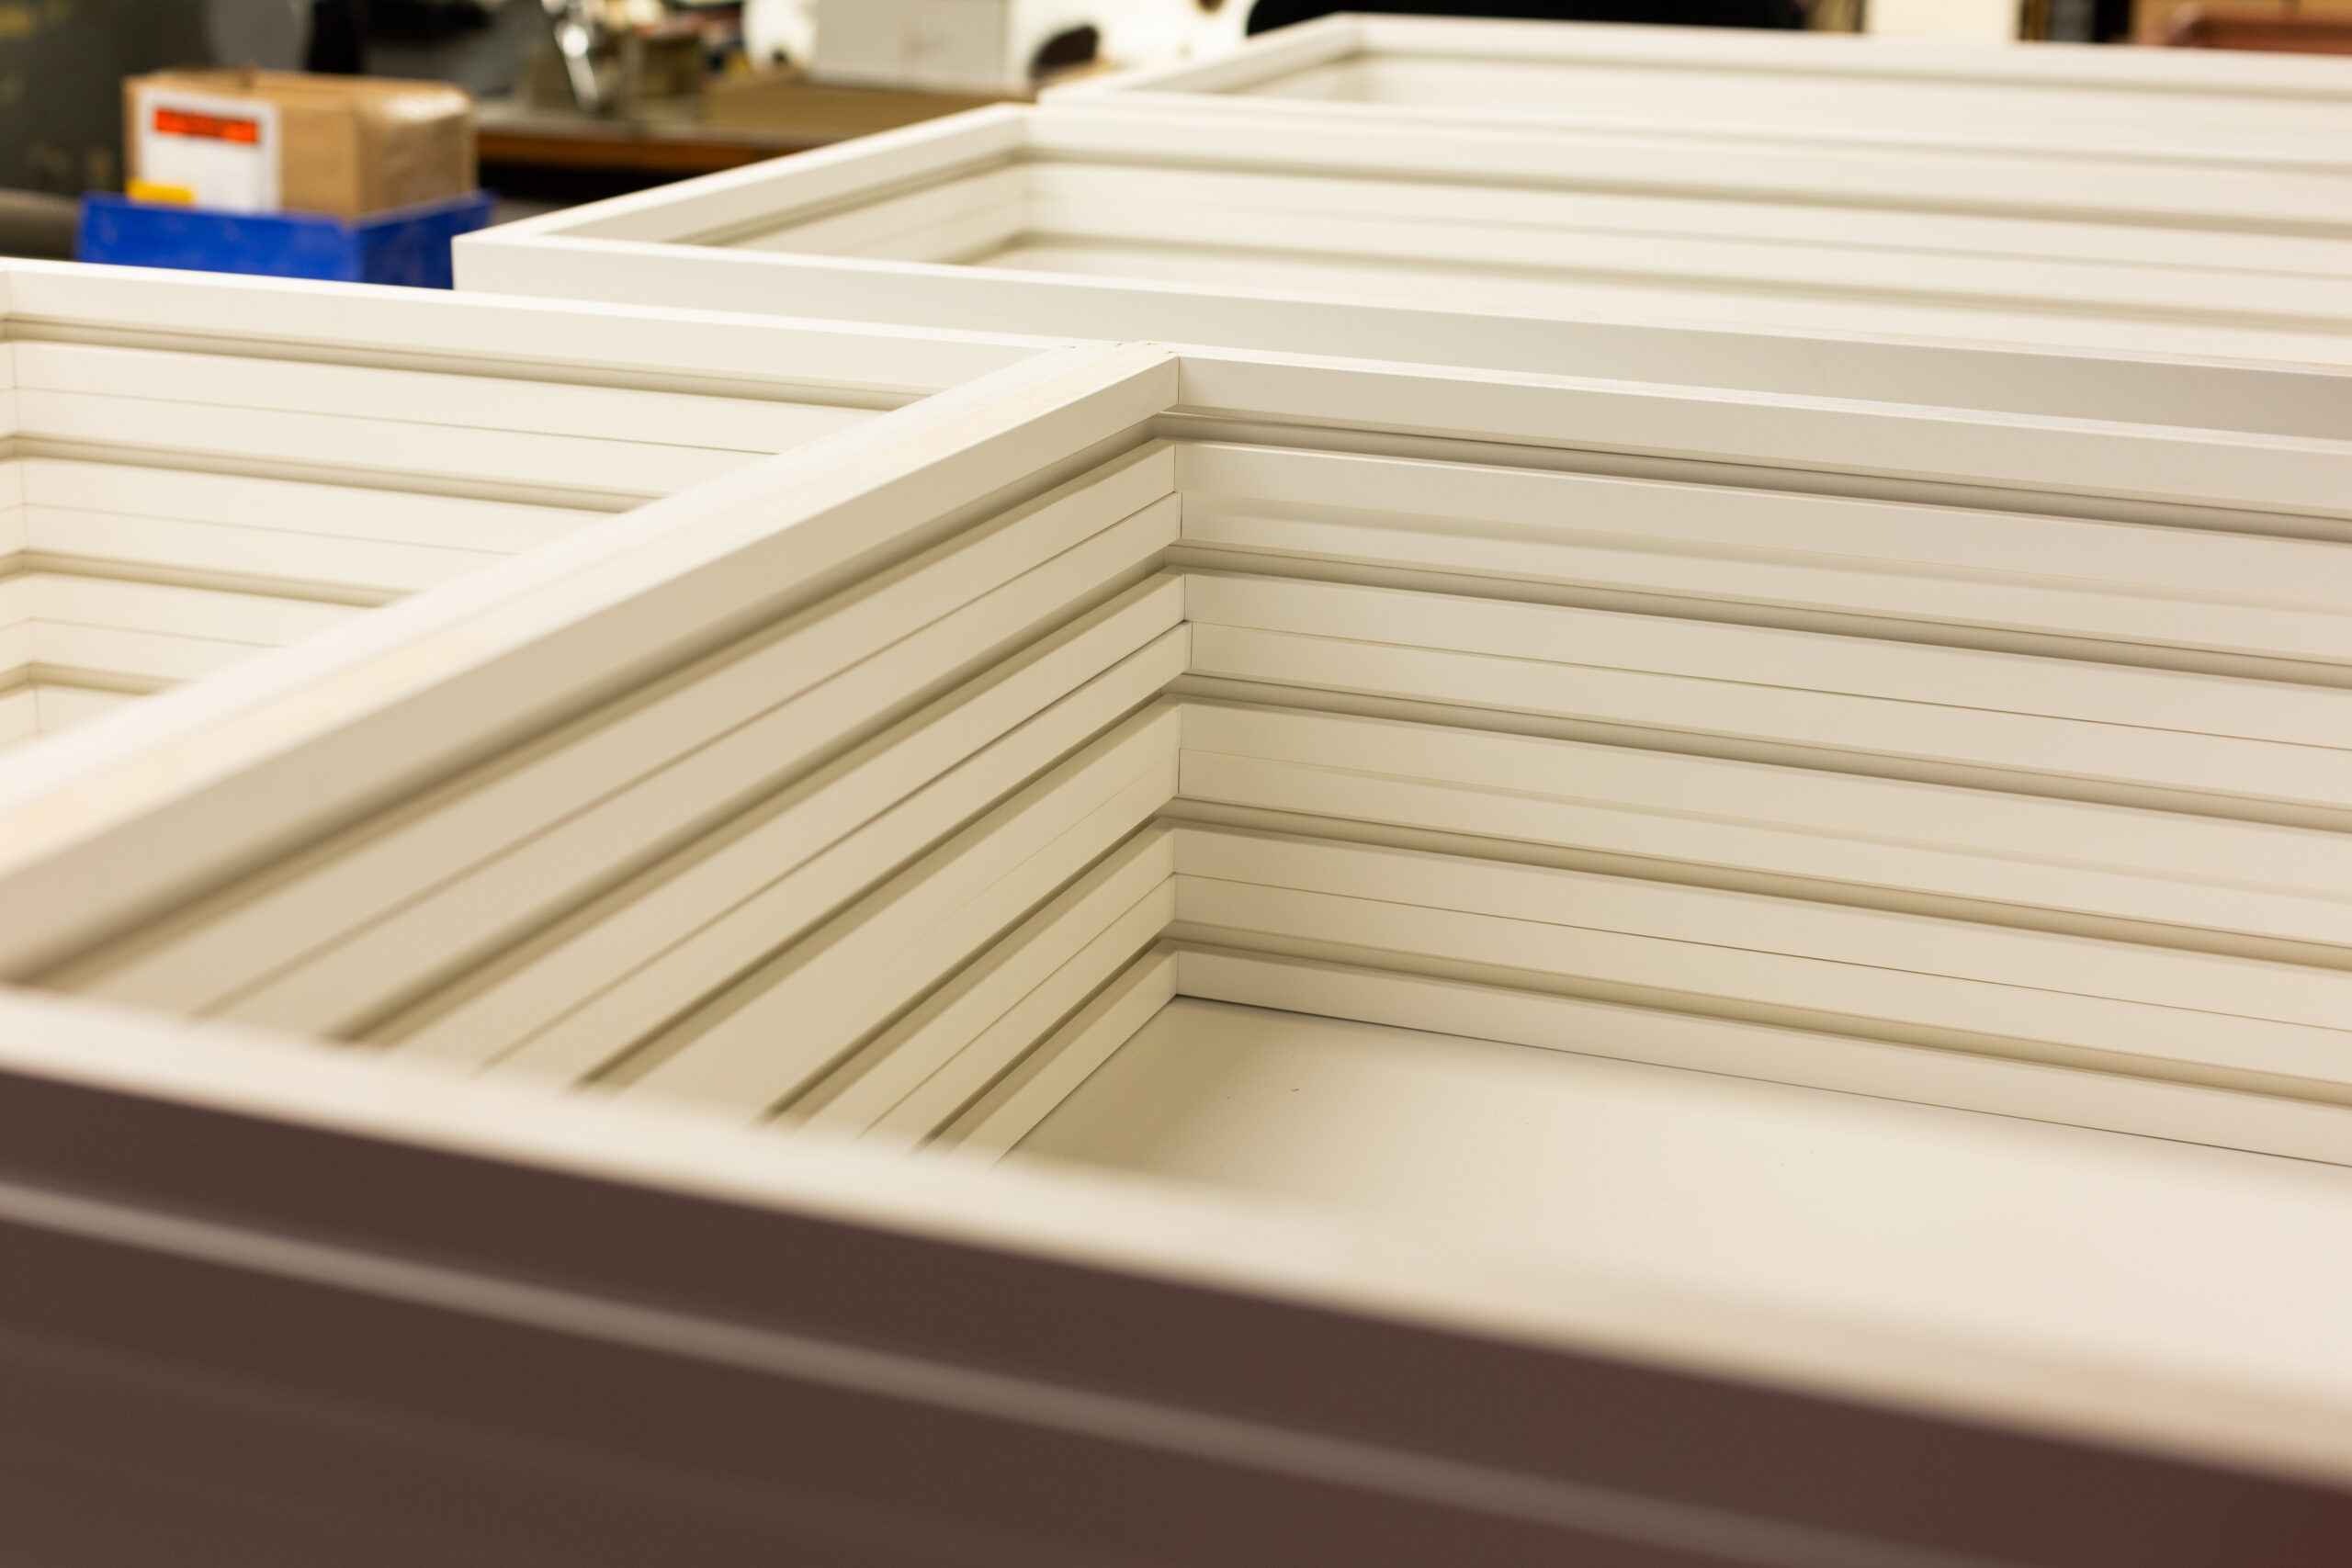 An example of Peterson Picture Co.'s frames order in bulk - perfectly sized modern white frames ready to be packed and delivered.